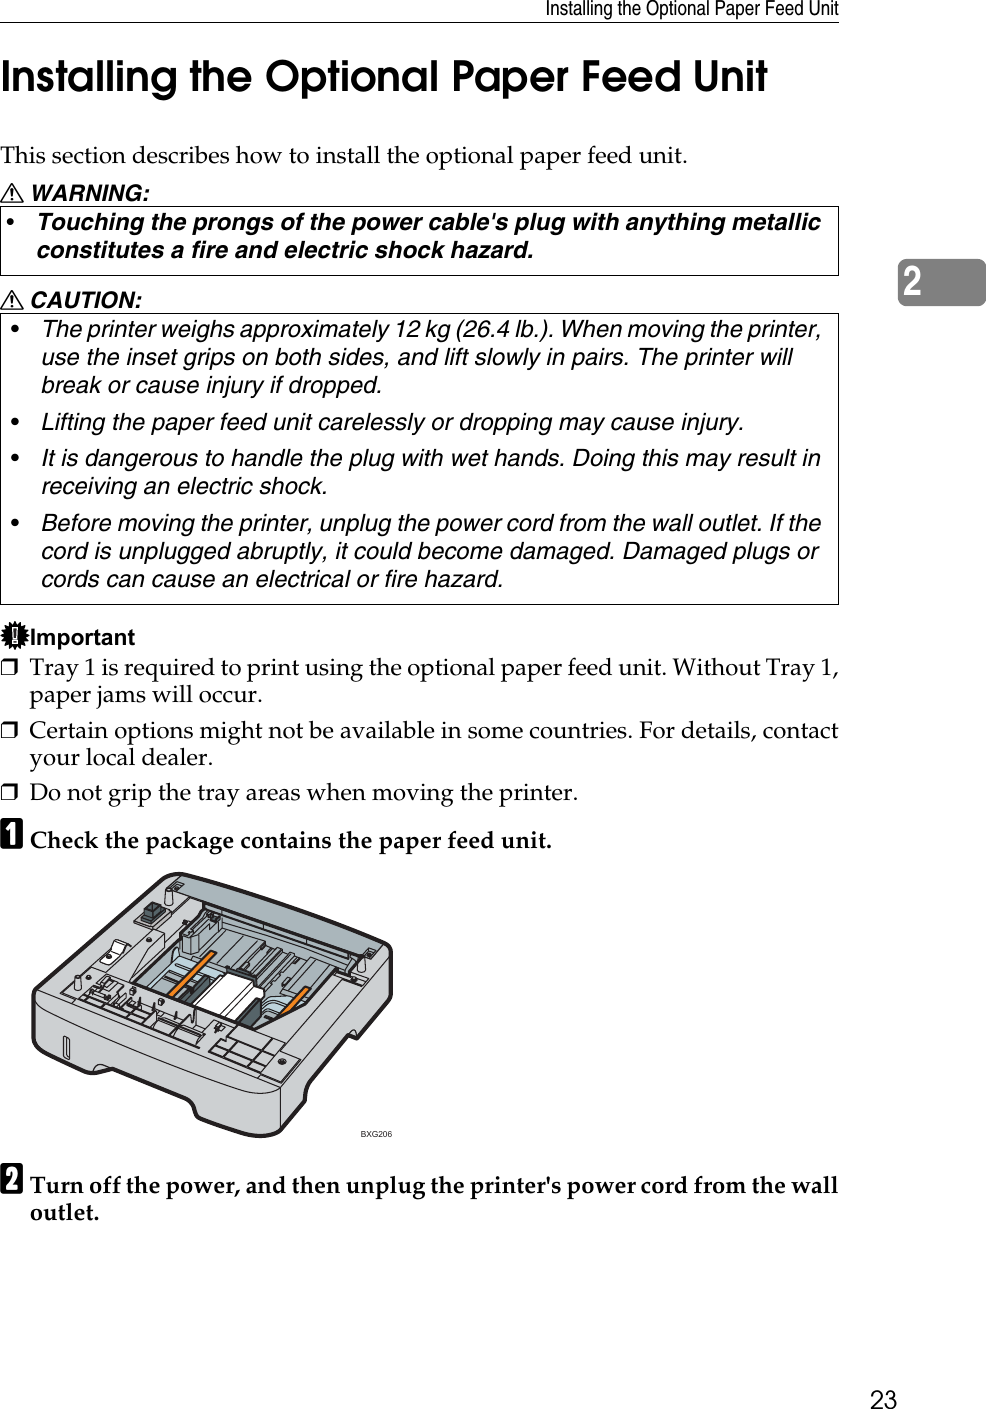 Installing the Optional Paper Feed Unit232Installing the Optional Paper Feed UnitThis section describes how to install the optional paper feed unit.R WARNING:R CAUTION:Important❒Tray 1 is required to print using the optional paper feed unit. Without Tray 1,paper jams will occur.❒Certain options might not be available in some countries. For details, contactyour local dealer.❒Do not grip the tray areas when moving the printer.ACheck the package contains the paper feed unit.BTurn off the power, and then unplug the printer&apos;s power cord from the walloutlet.•Touching the prongs of the power cable&apos;s plug with anything metallic constitutes a fire and electric shock hazard.•The printer weighs approximately 12 kg (26.4 lb.). When moving the printer, use the inset grips on both sides, and lift slowly in pairs. The printer will break or cause injury if dropped.•Lifting the paper feed unit carelessly or dropping may cause injury.•It is dangerous to handle the plug with wet hands. Doing this may result in receiving an electric shock.•Before moving the printer, unplug the power cord from the wall outlet. If the cord is unplugged abruptly, it could become damaged. Damaged plugs or cords can cause an electrical or fire hazard.BXG206